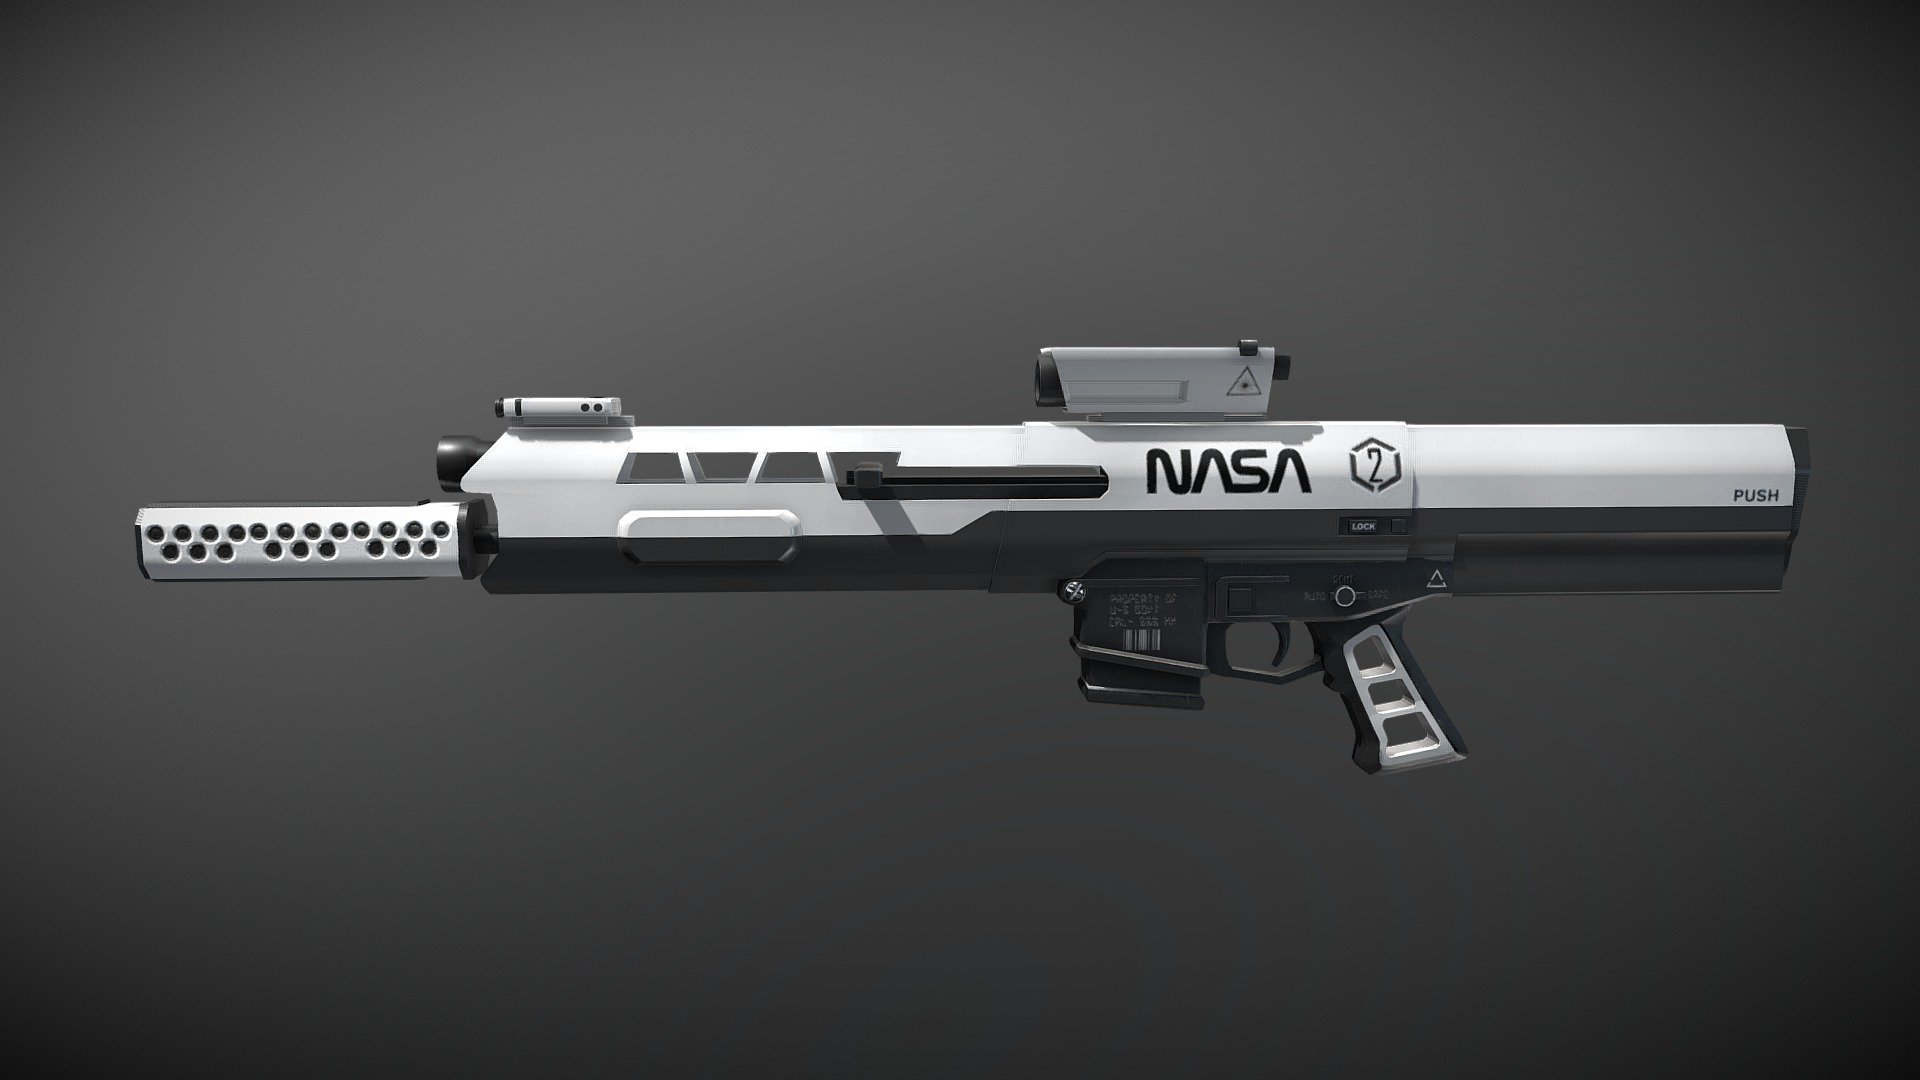 This is my first time using Substance Painter, still have alot of room to improve on my texturing skills.
Modeled after the Oblivion Rifle, changed the theme to NASA.
Modeled in Maya and textured in Substance Painter

Big thank you to my friend Sean for introducing me to Substance Painter. 
Check out his profile : https://sketchfab.com/Mr.Kimono - NASA Assault Rifle - 3D model by haise8704 3d model